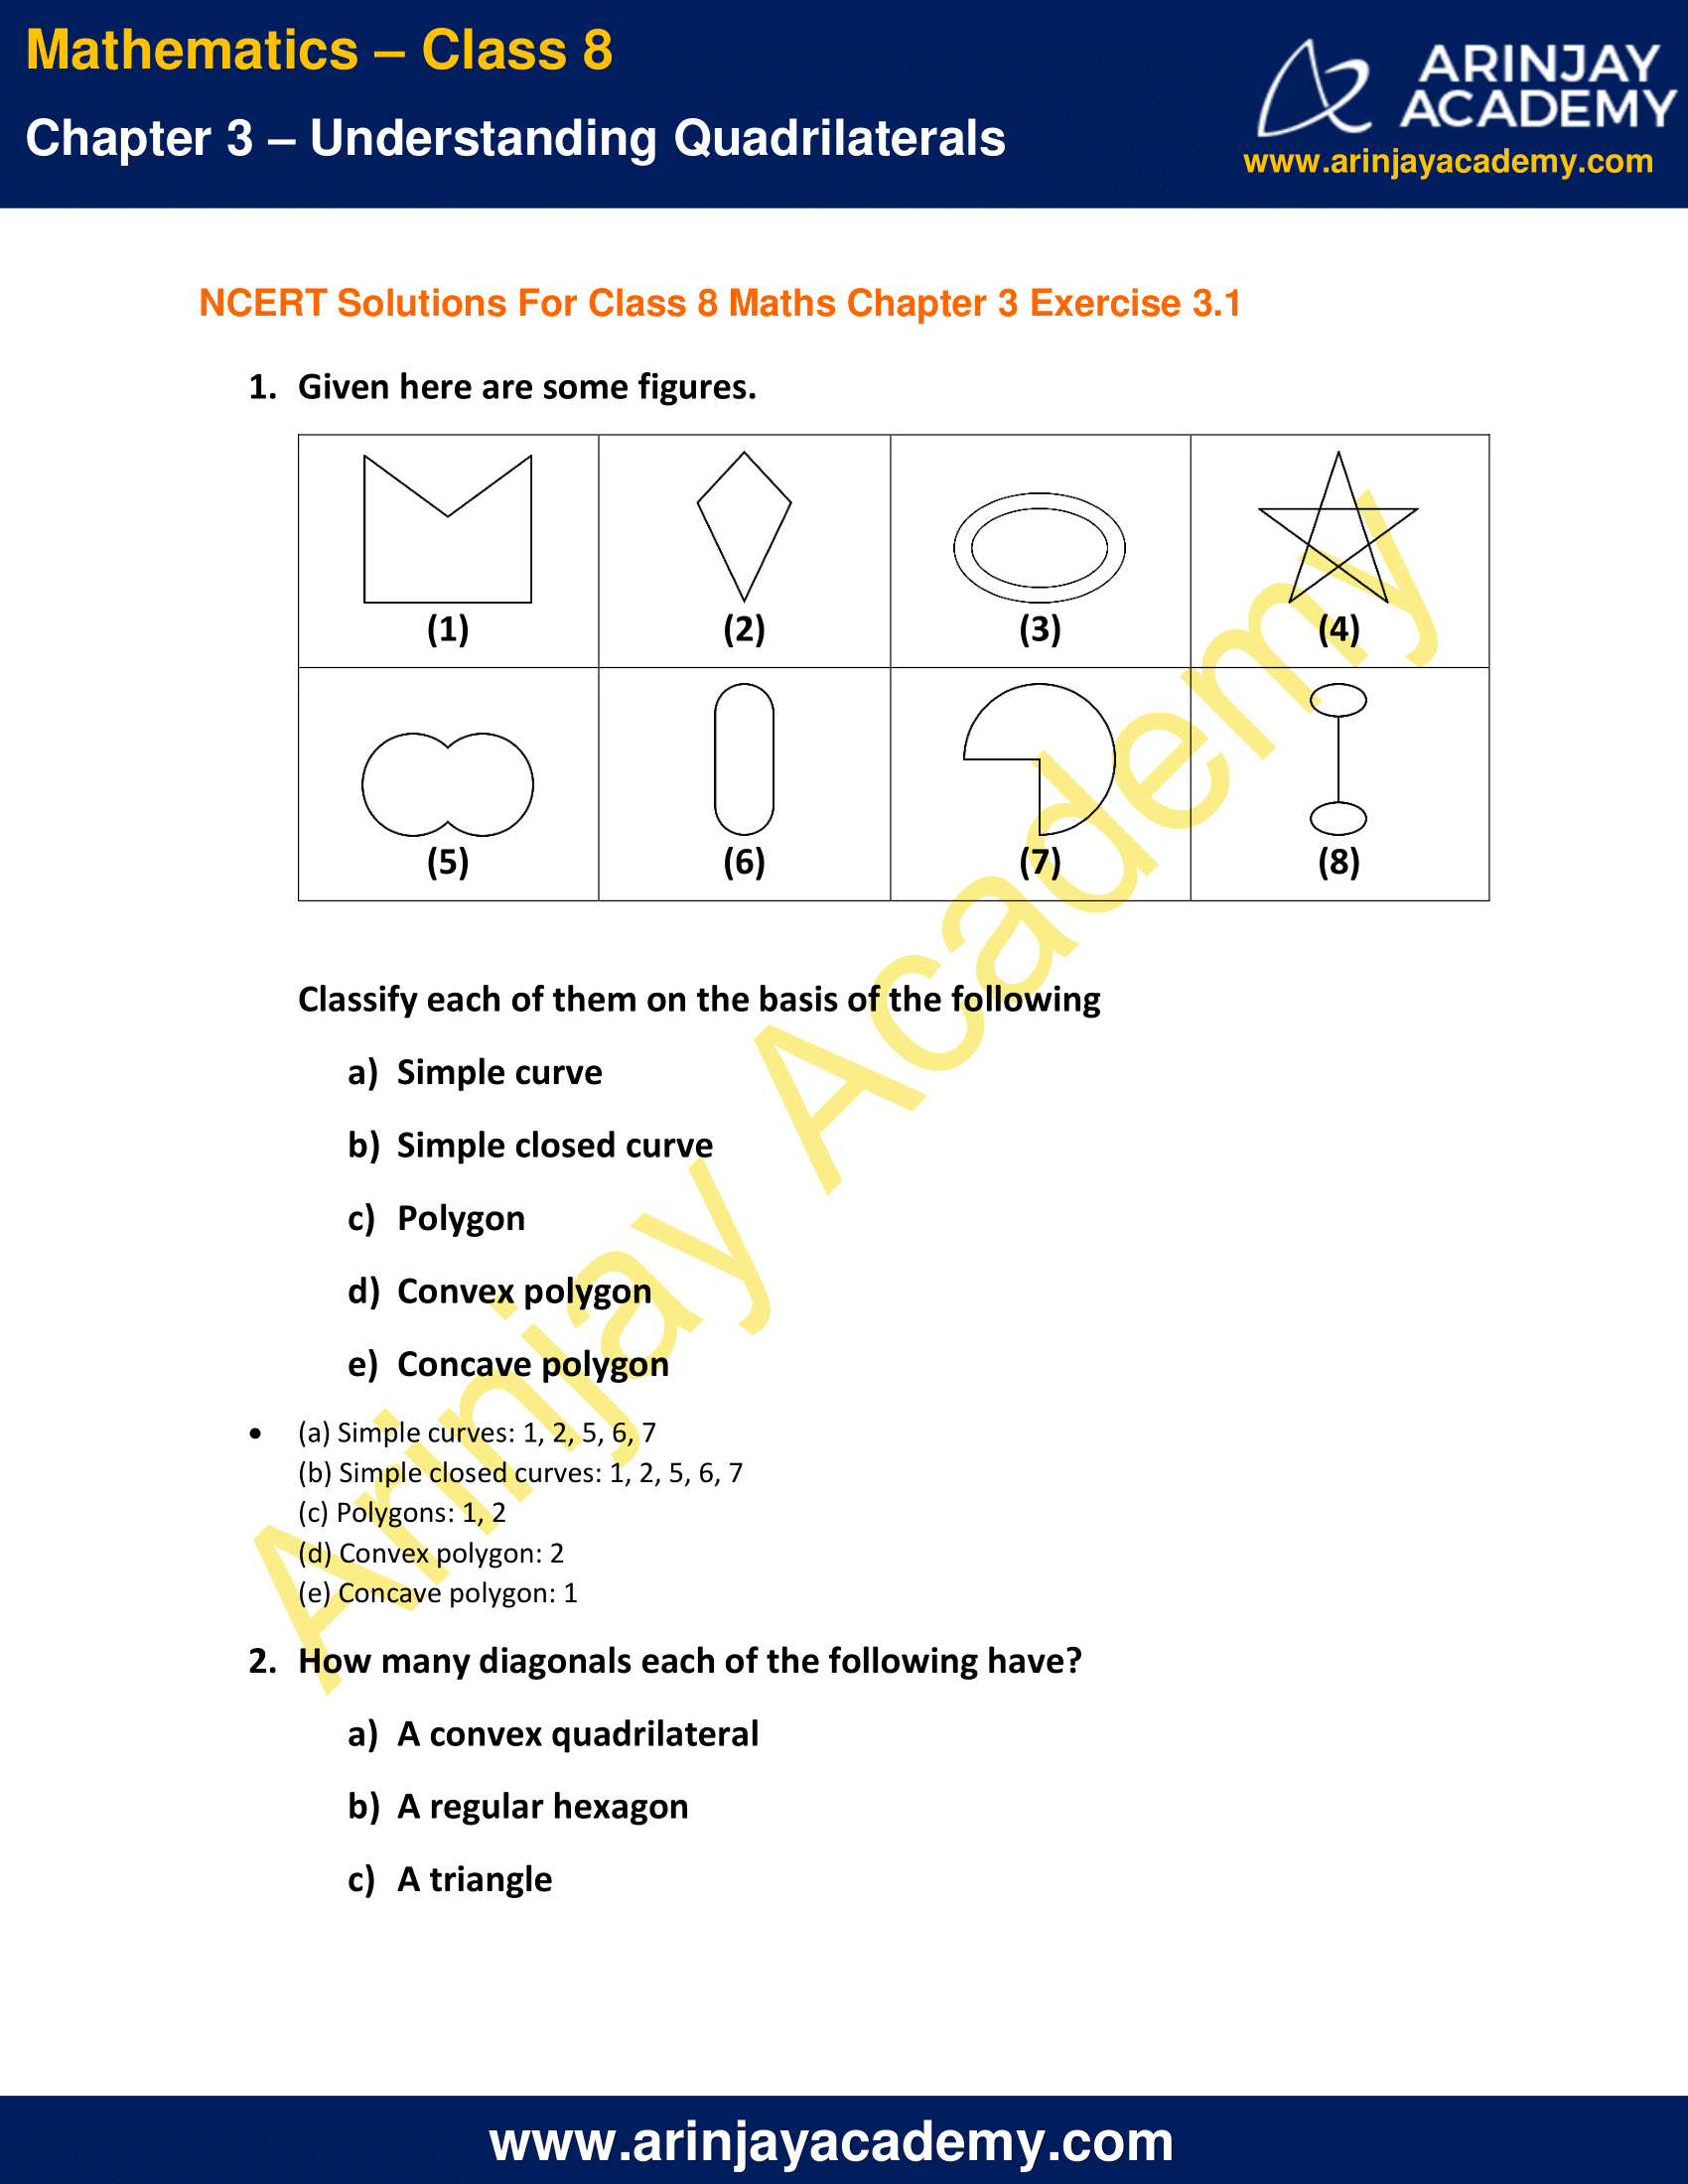 NCERT Solutions for Class 8 Maths Chapter 3 Exercise 3.1 image 1